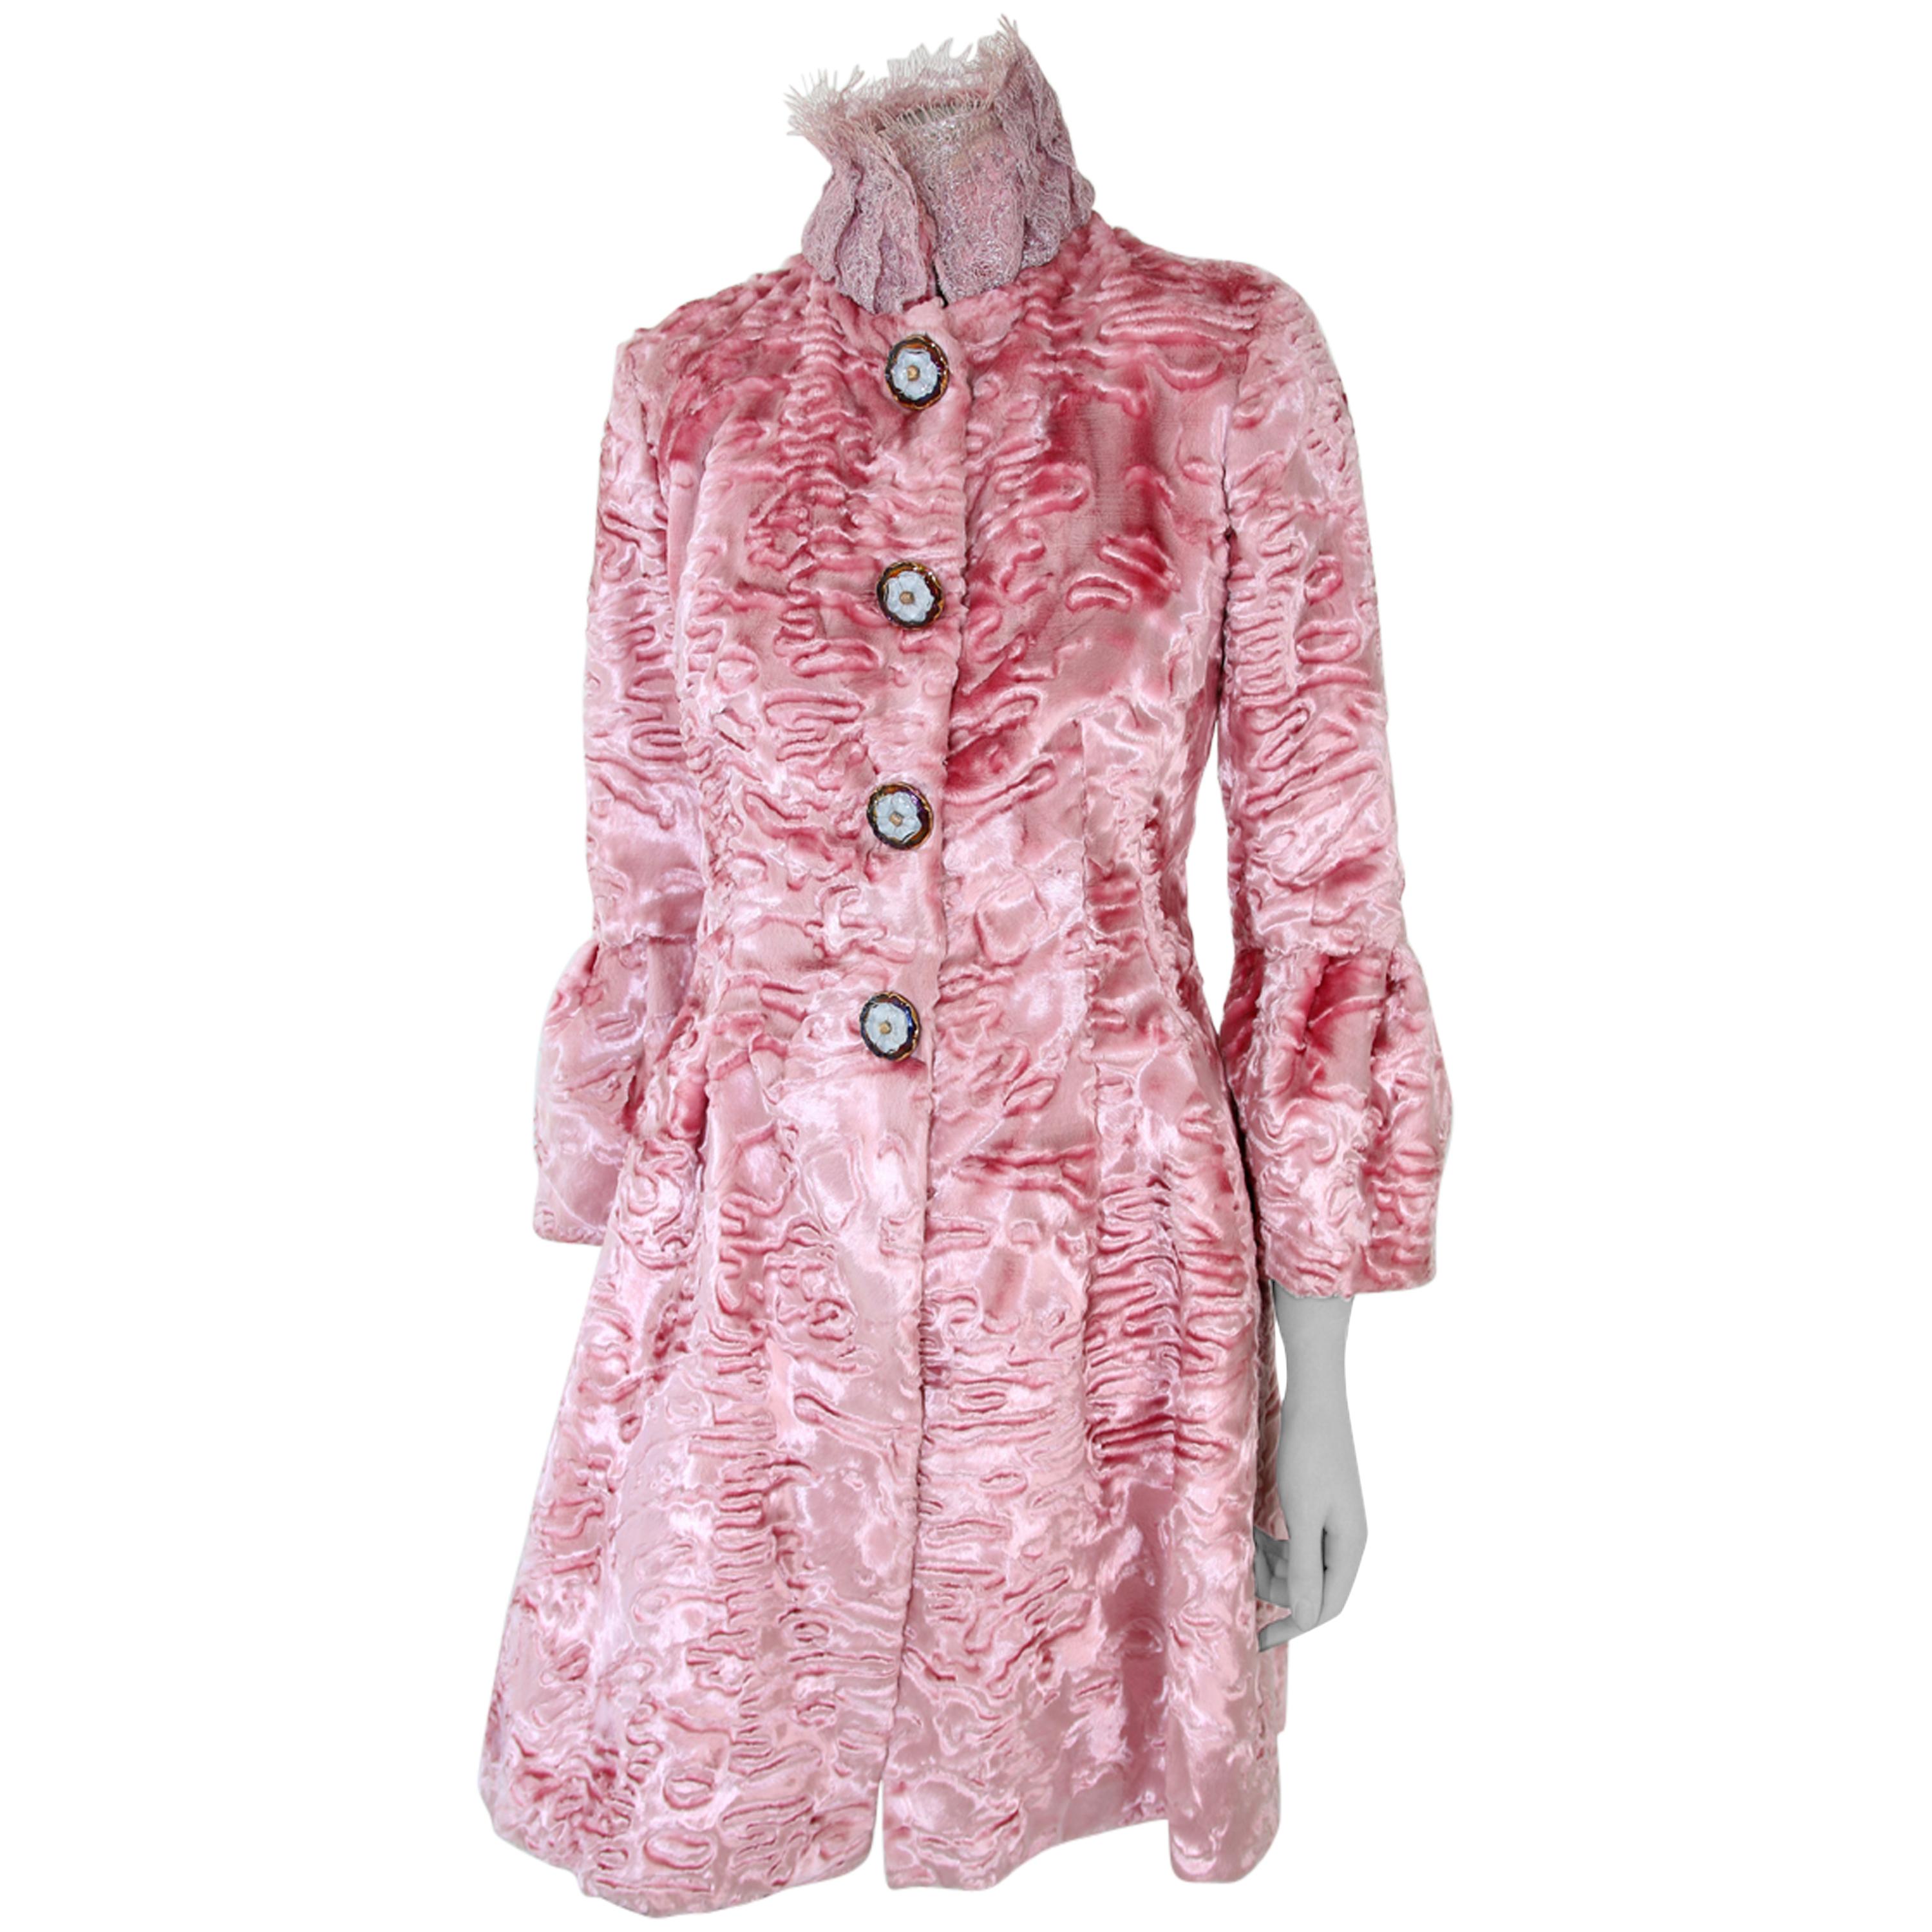 Pelush Pink Faux Fur Coat with Vintage Glass Buttons and Chantilly Lace - XS